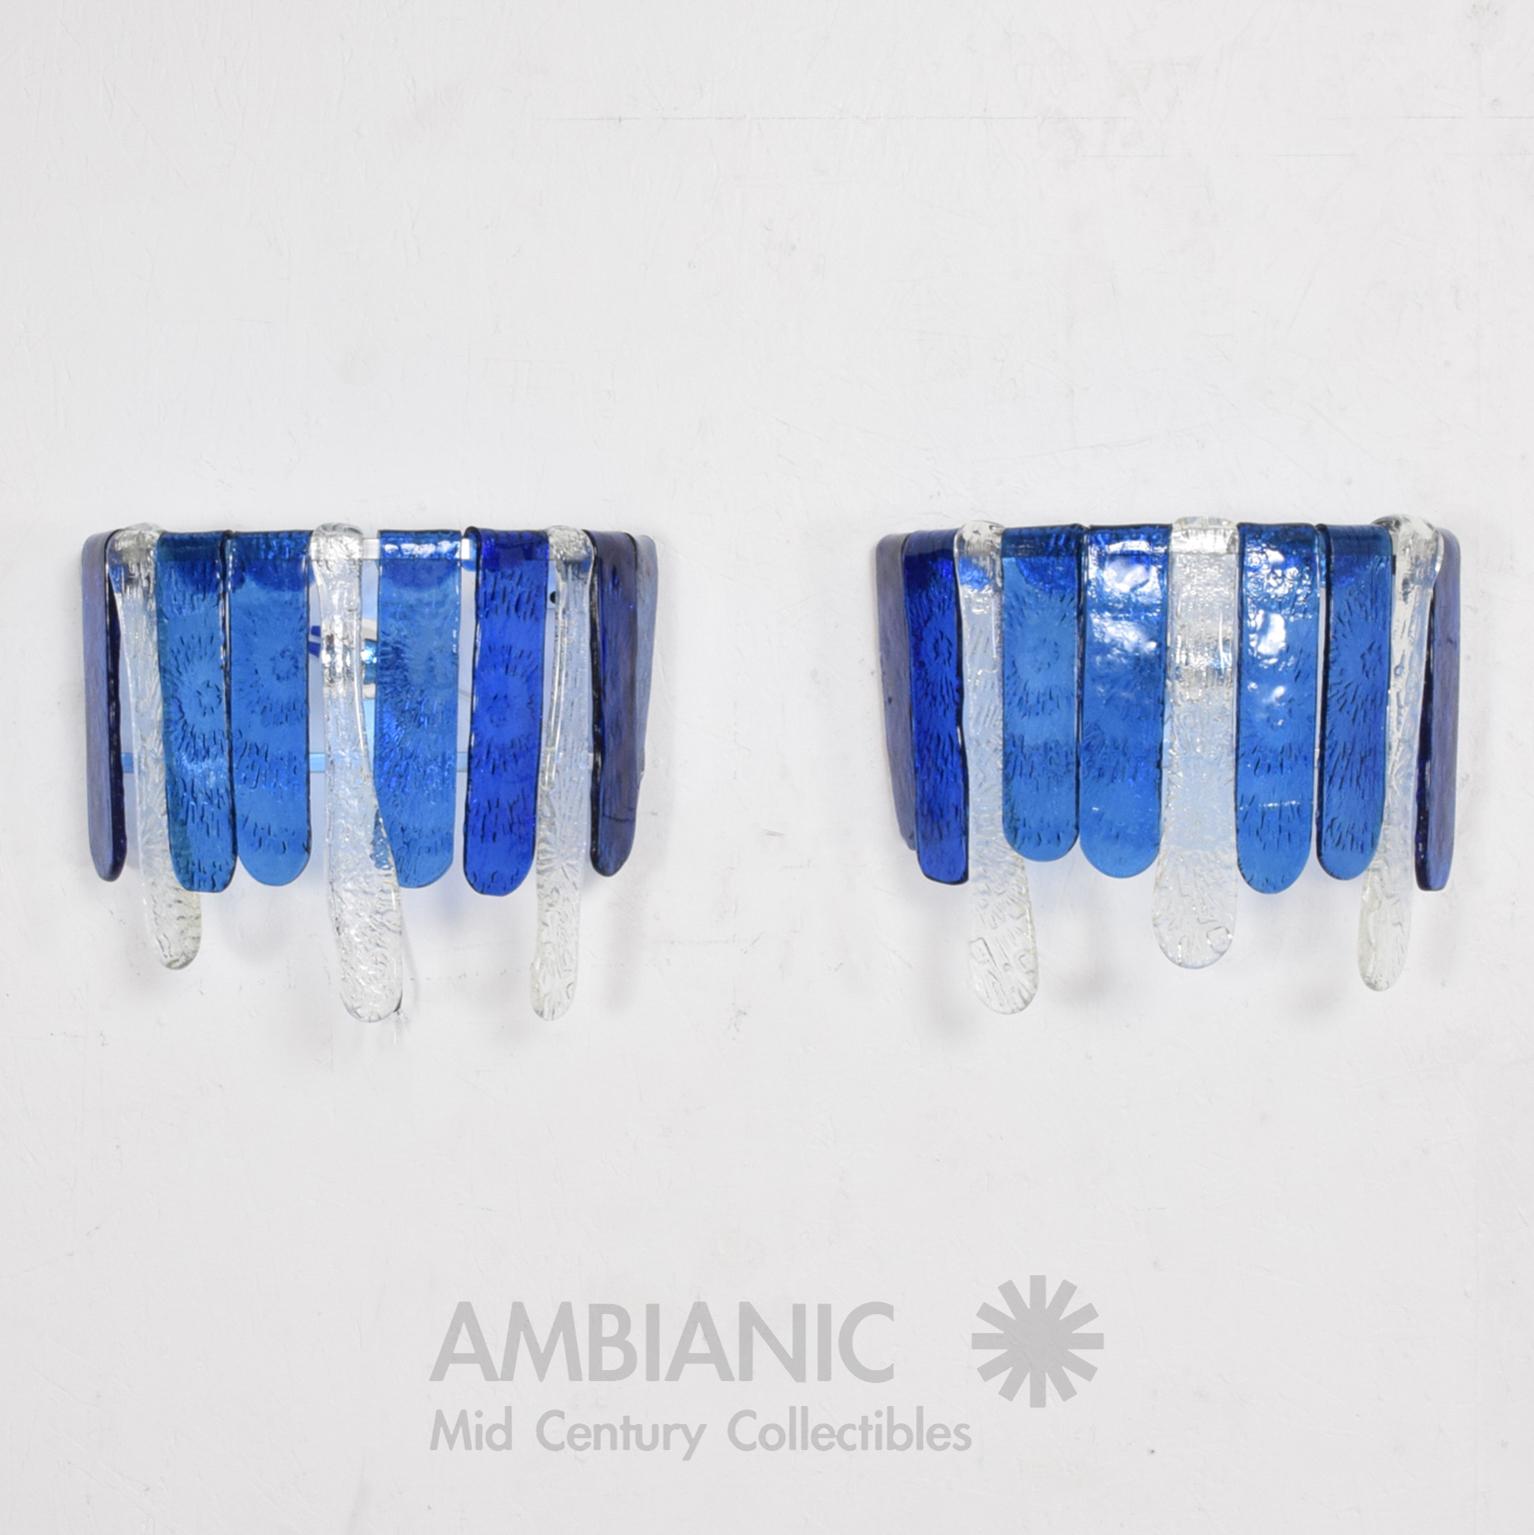 For your consideration: 1970s Mexico Mid-Century Modernism pair of hand blown glass wall sconces in a luscious blue and clear glass, attribution Feders- the renown Mexican modernist glass workshop featuring designs by Mexico City artisan Felipe